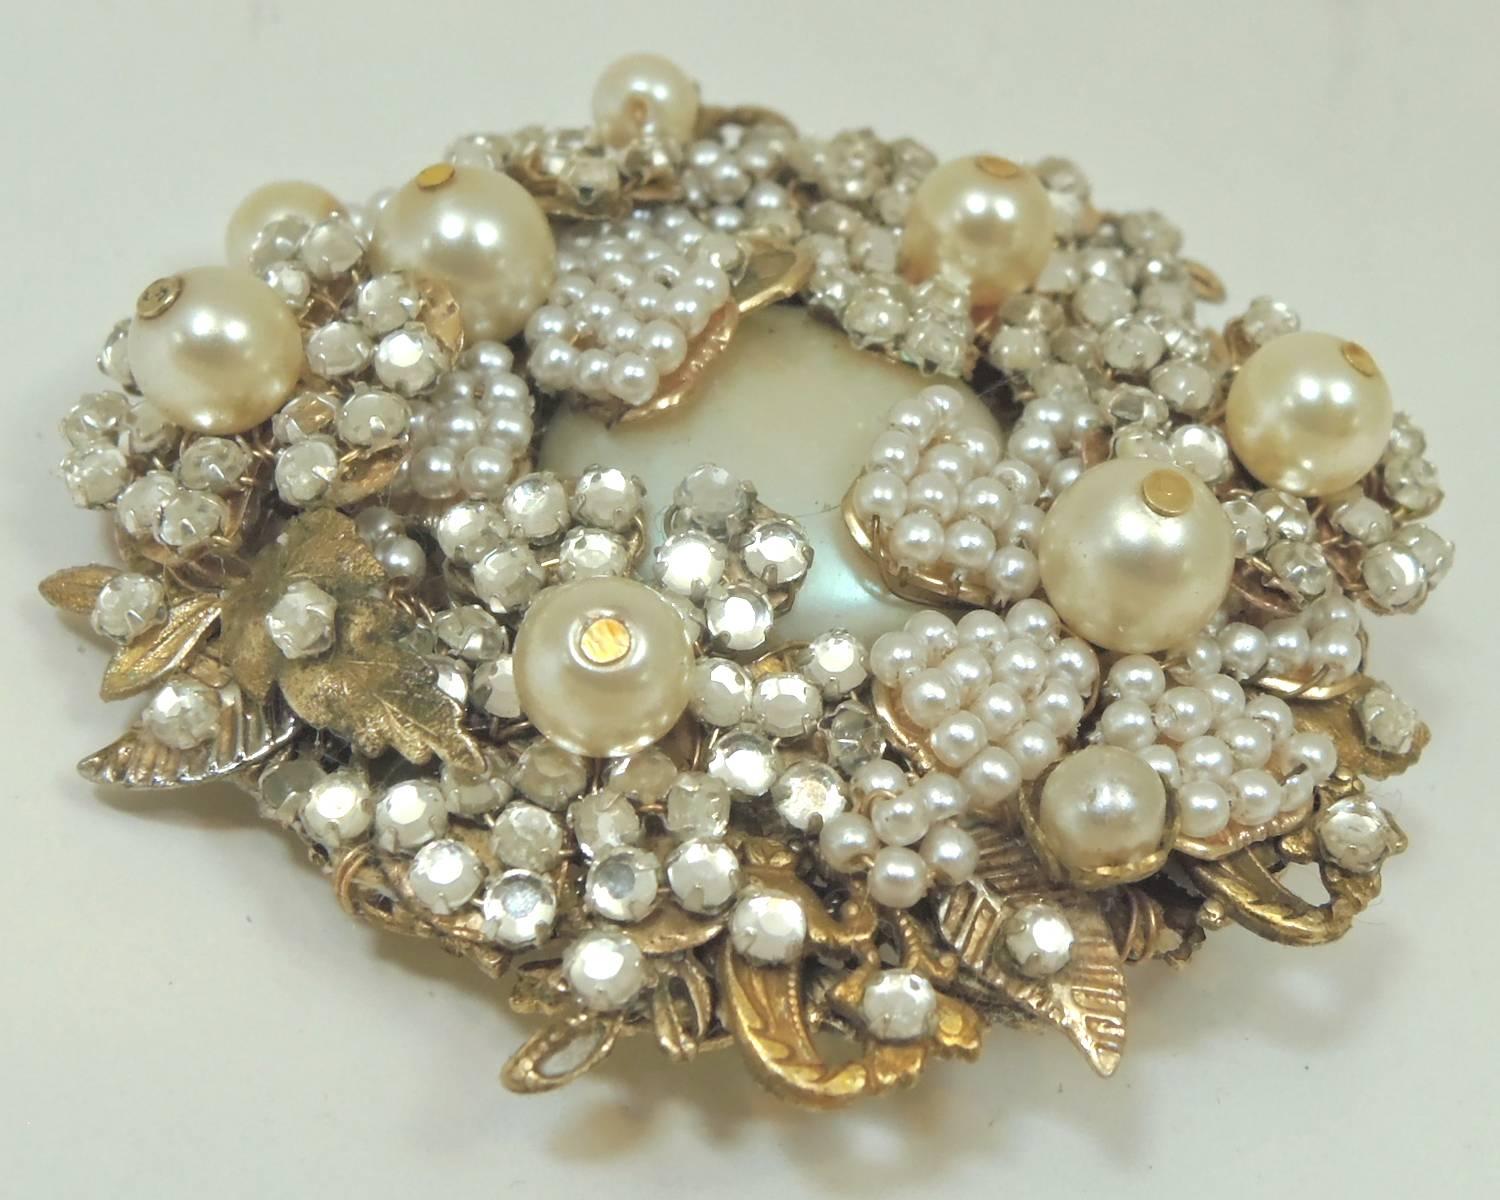 Miriam Haskell is known for her beautiful floral brooches and creative work. This brooch is a fine example. It was designed with flowers all accentuated with rose montee stones and faux seed pearls. There are nine round faux pearls scattered